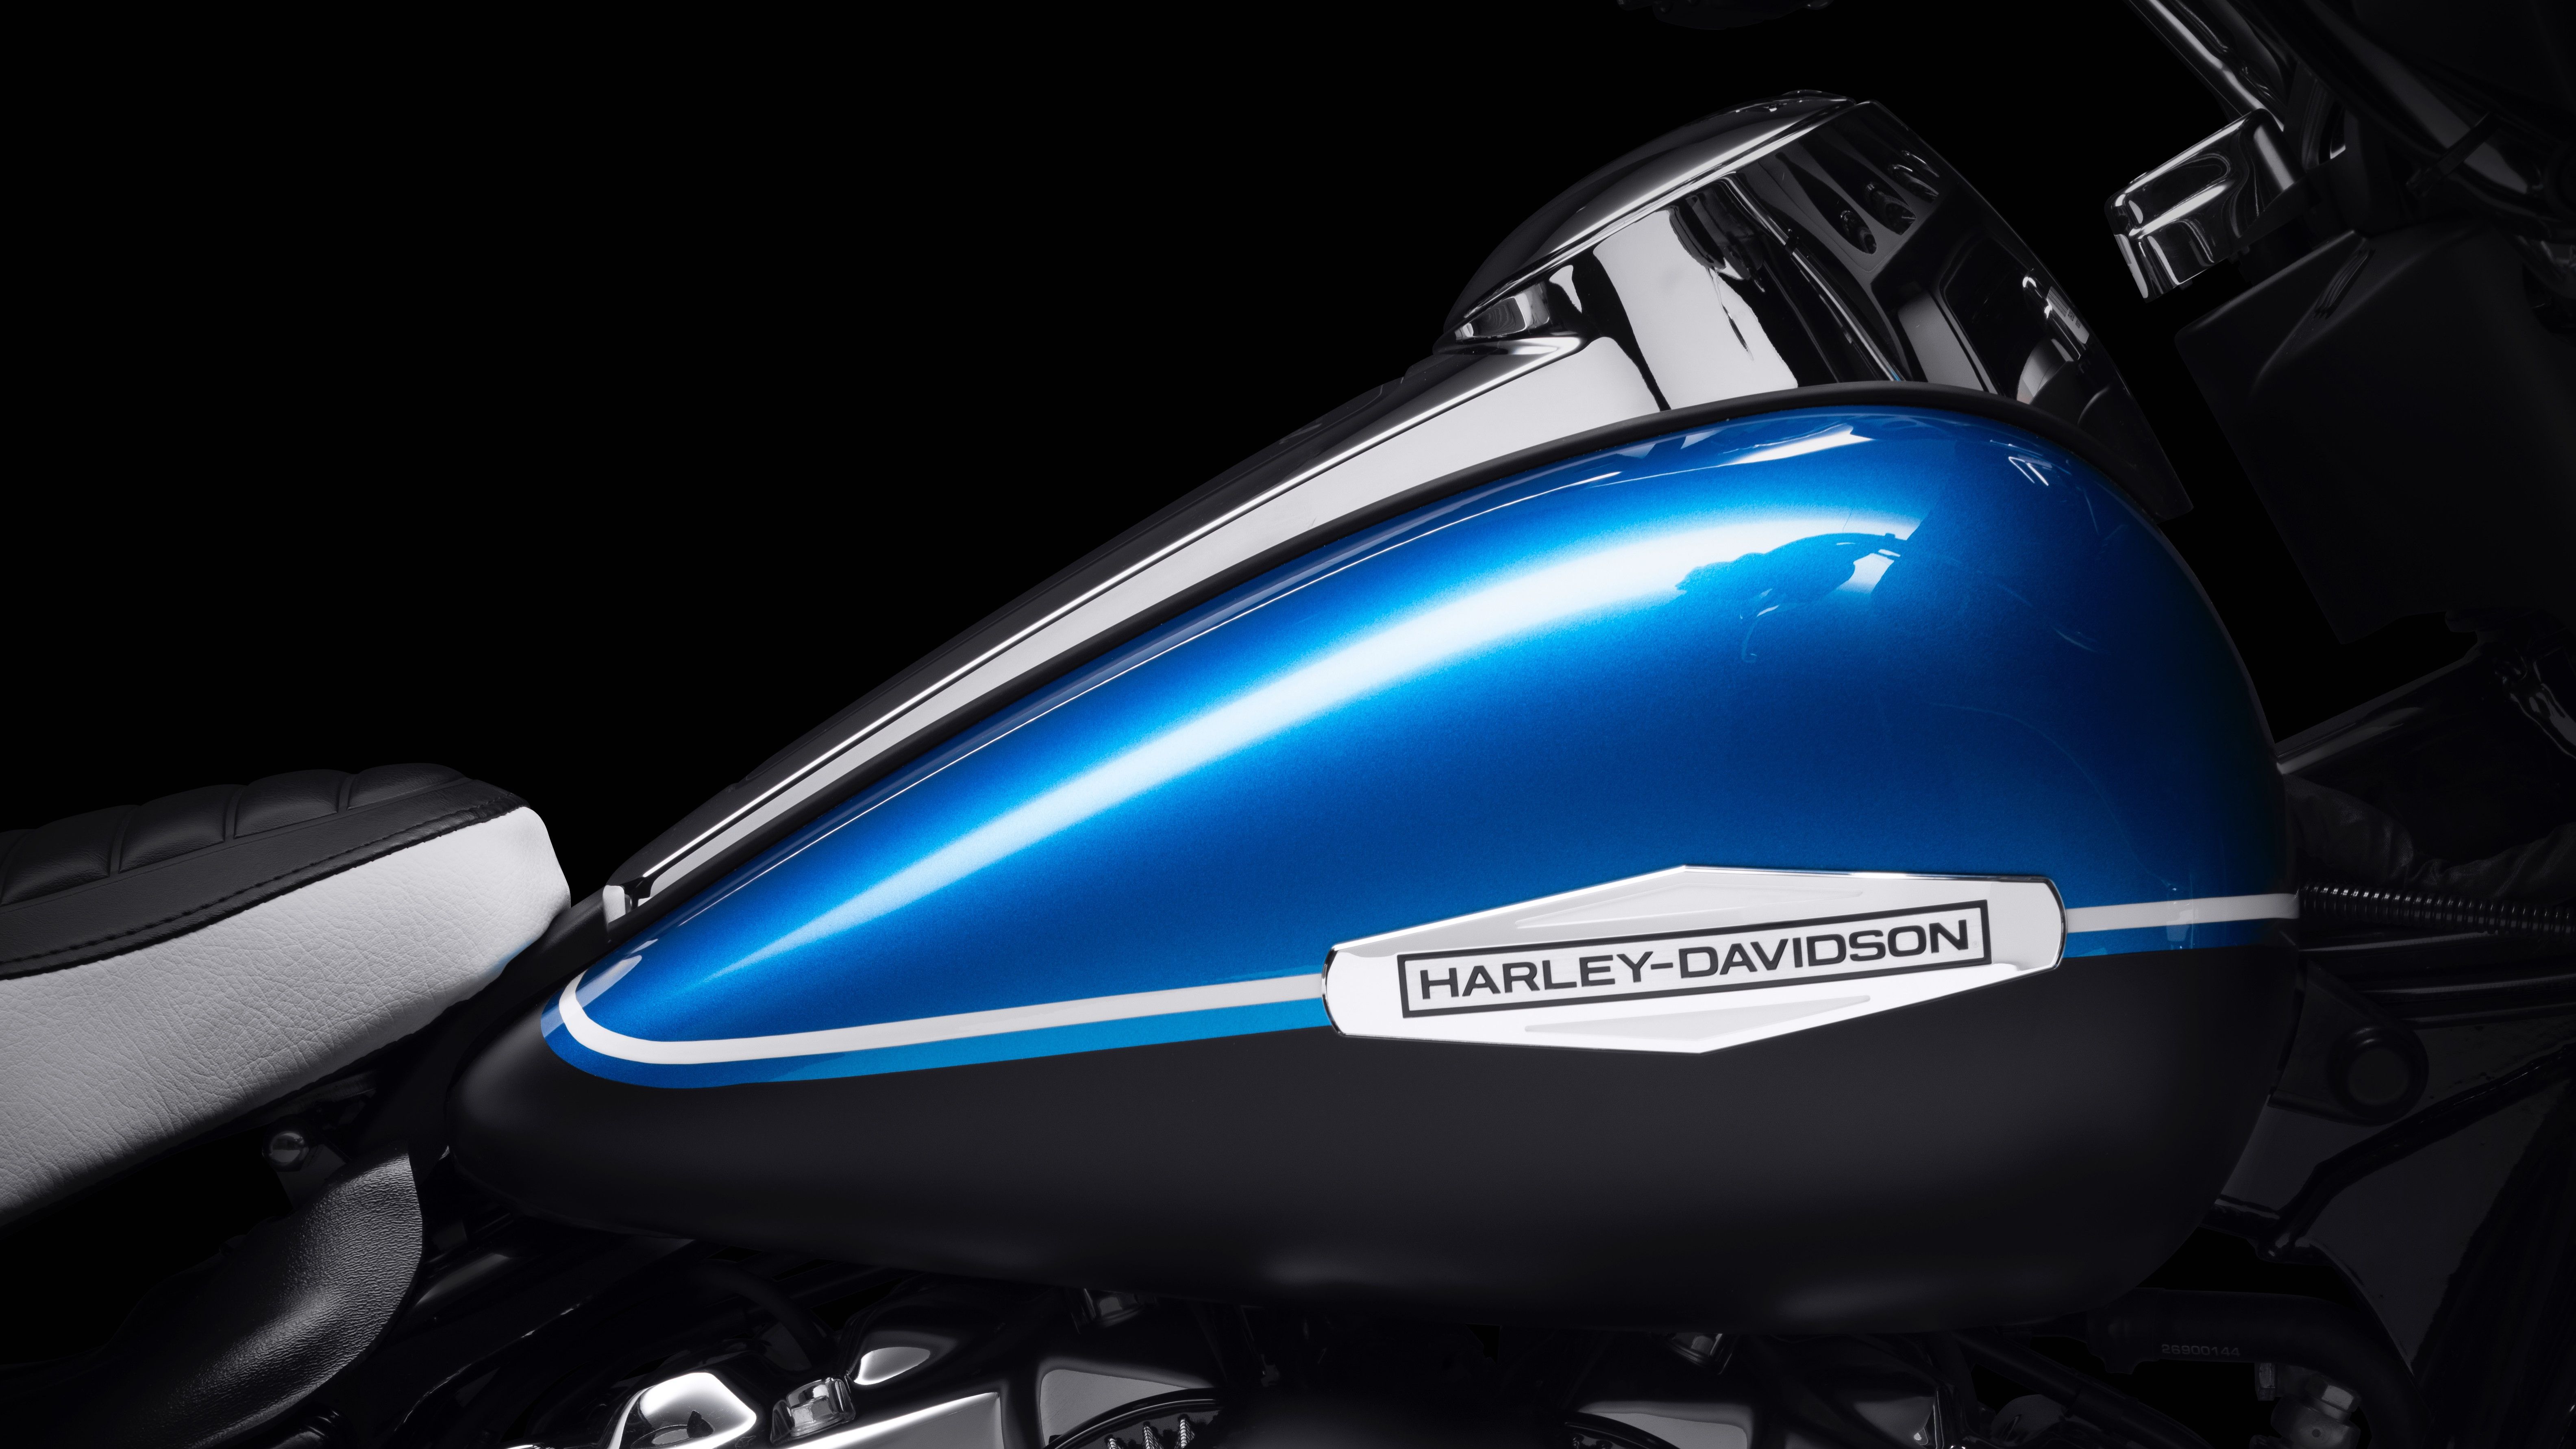 2021 Harley-Davidson Electra Glide Revival, First Look Review